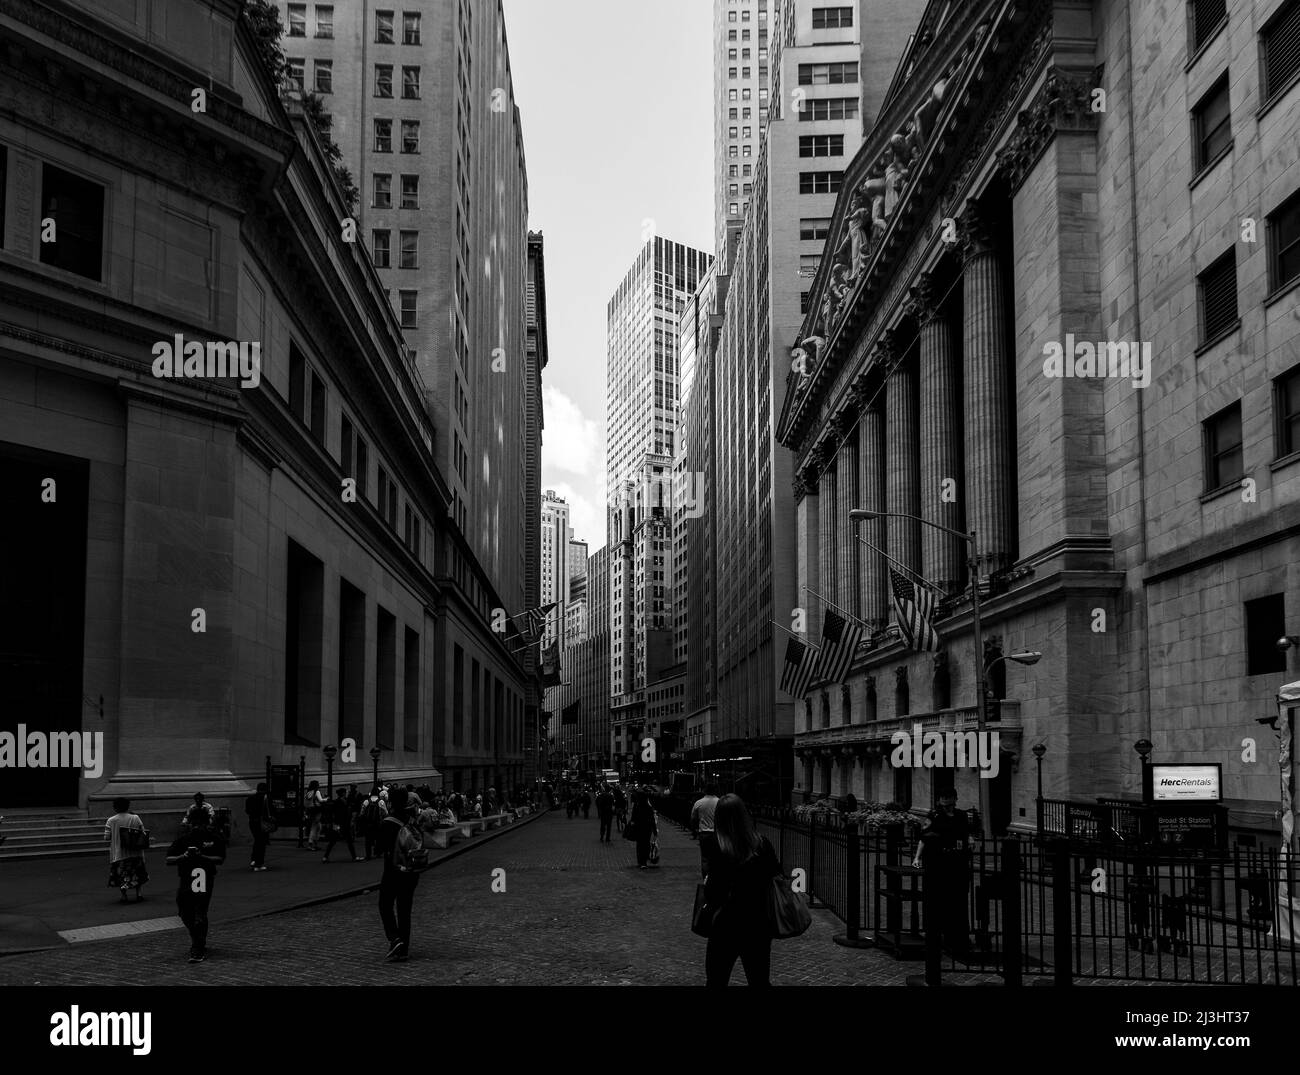 Broad Street, New York City, NY, USA, New York Stock Exchange. With origins as far back as 1792, the NYSE is currently the world's largest exchange by market capitalization. Stock Photo